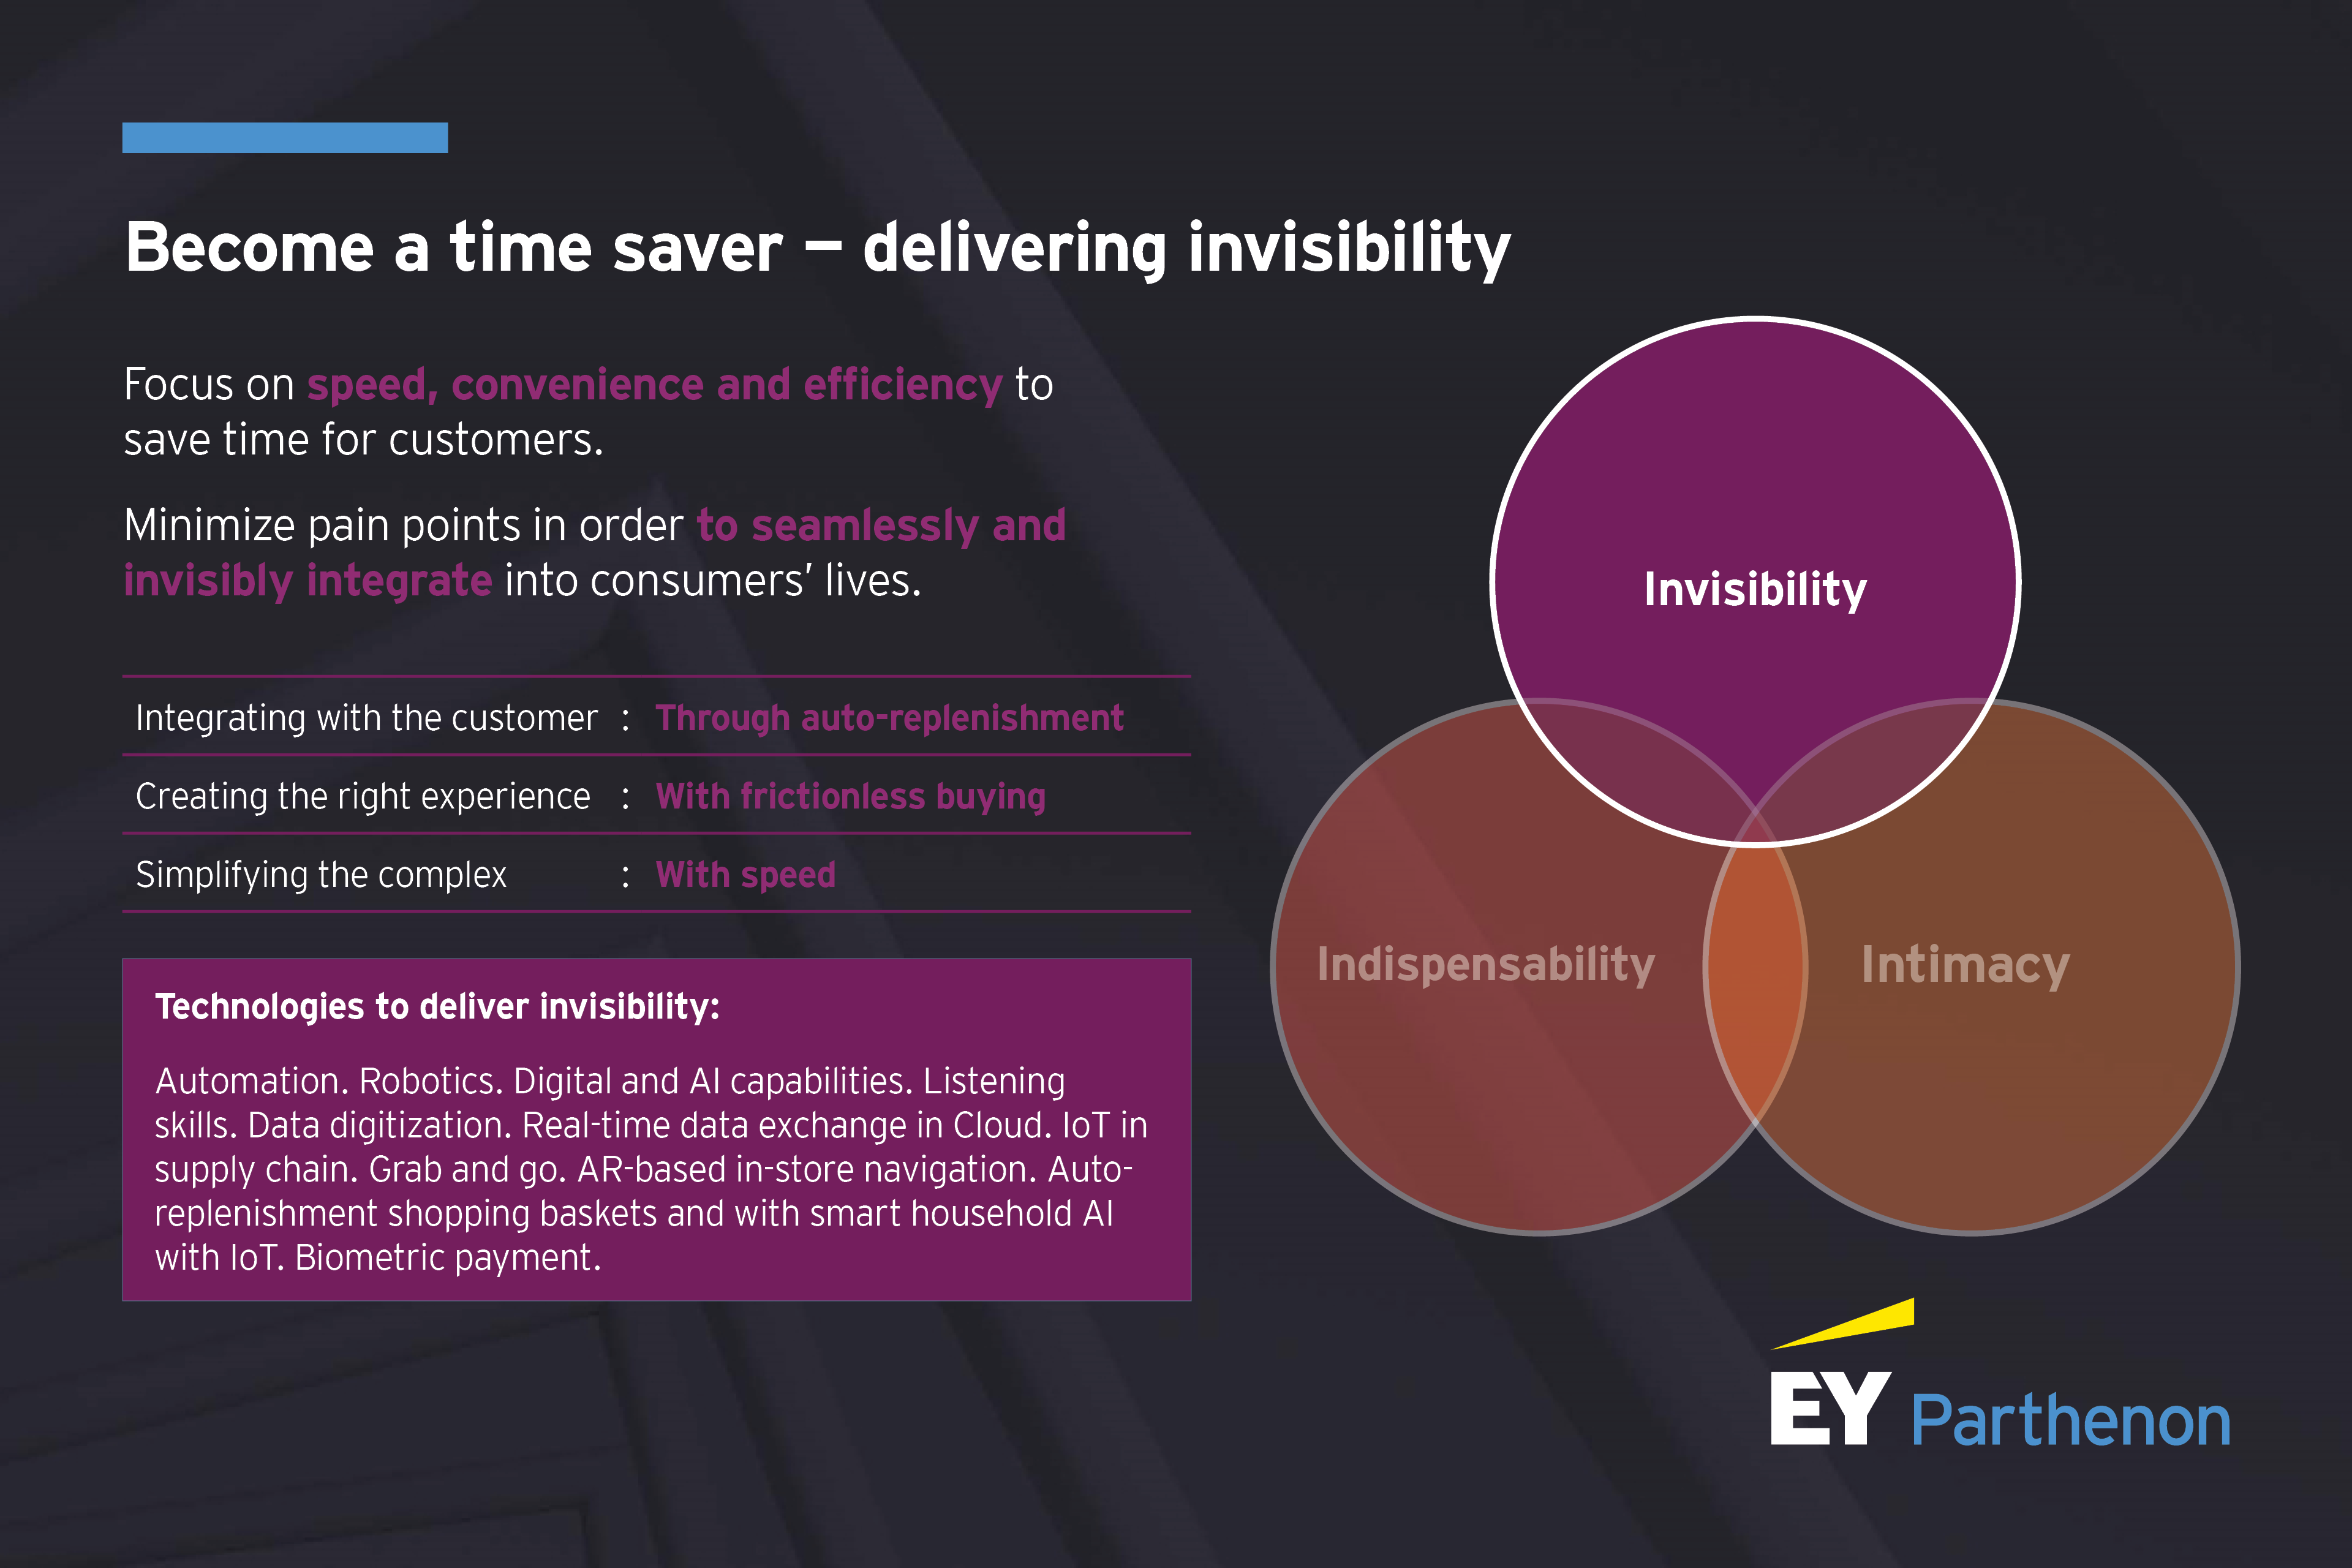 Become a time save: How retailers can deliver invisibility